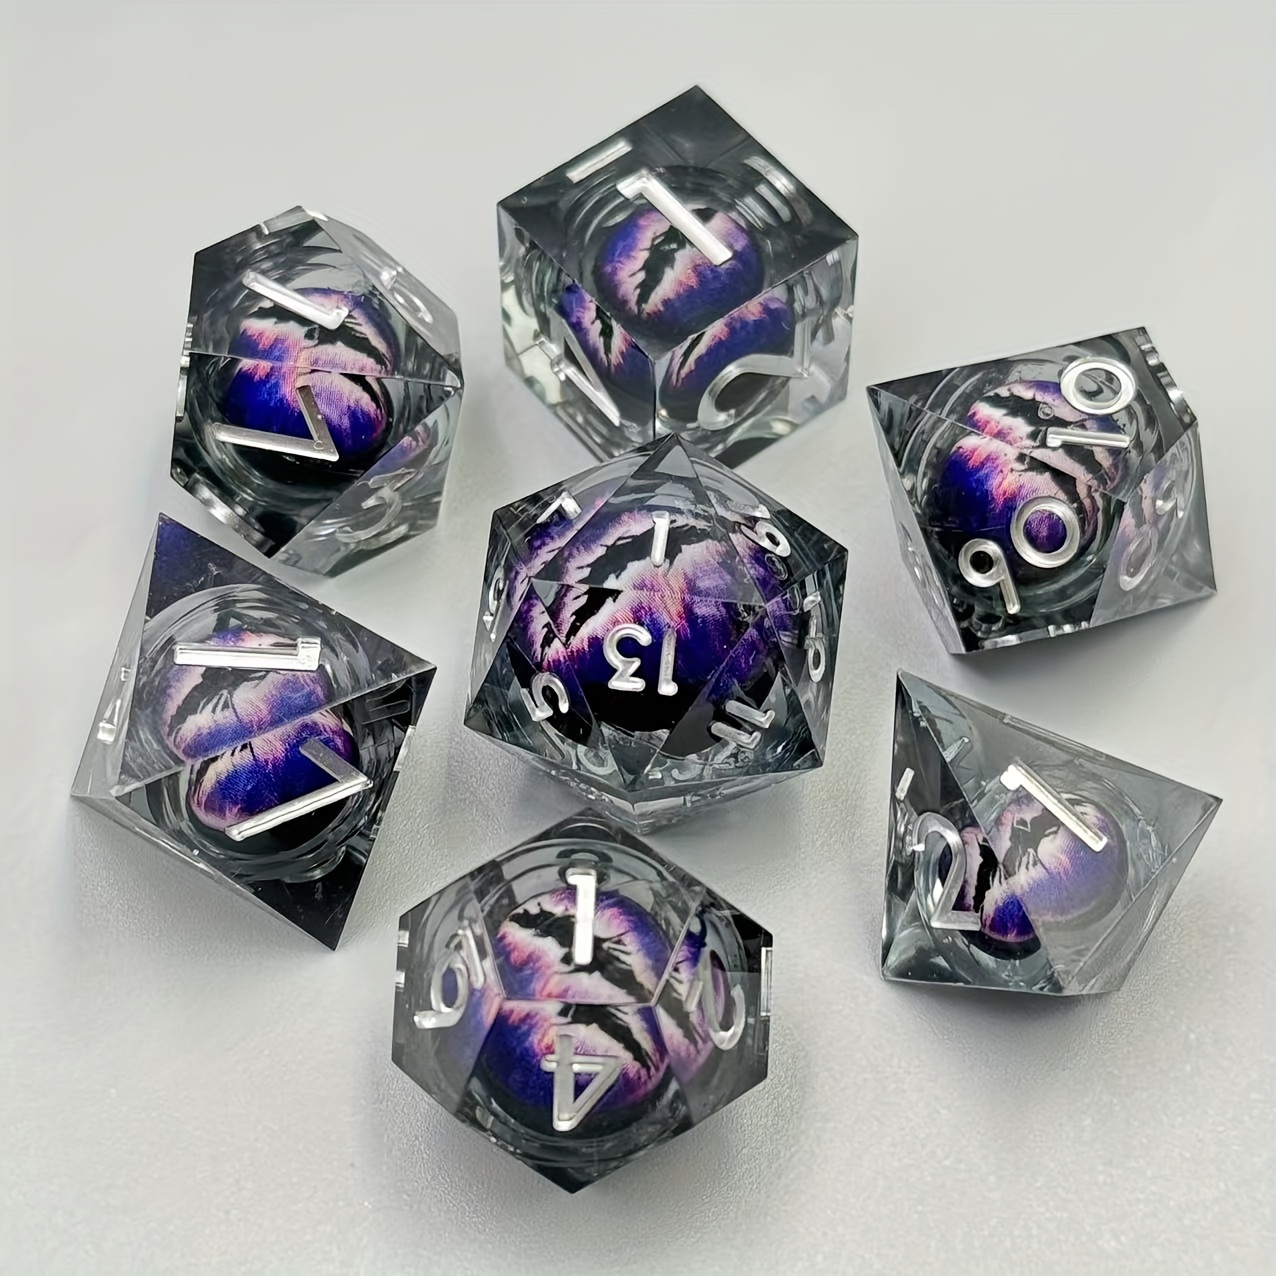 

Set Of 7pcs New Dragon King's Eye Multi-sided Dice, Tree Number Dice, Running Team Board Game Party Game Accessories, Dragon King Series D4 D6 D8 D10 D12 D20